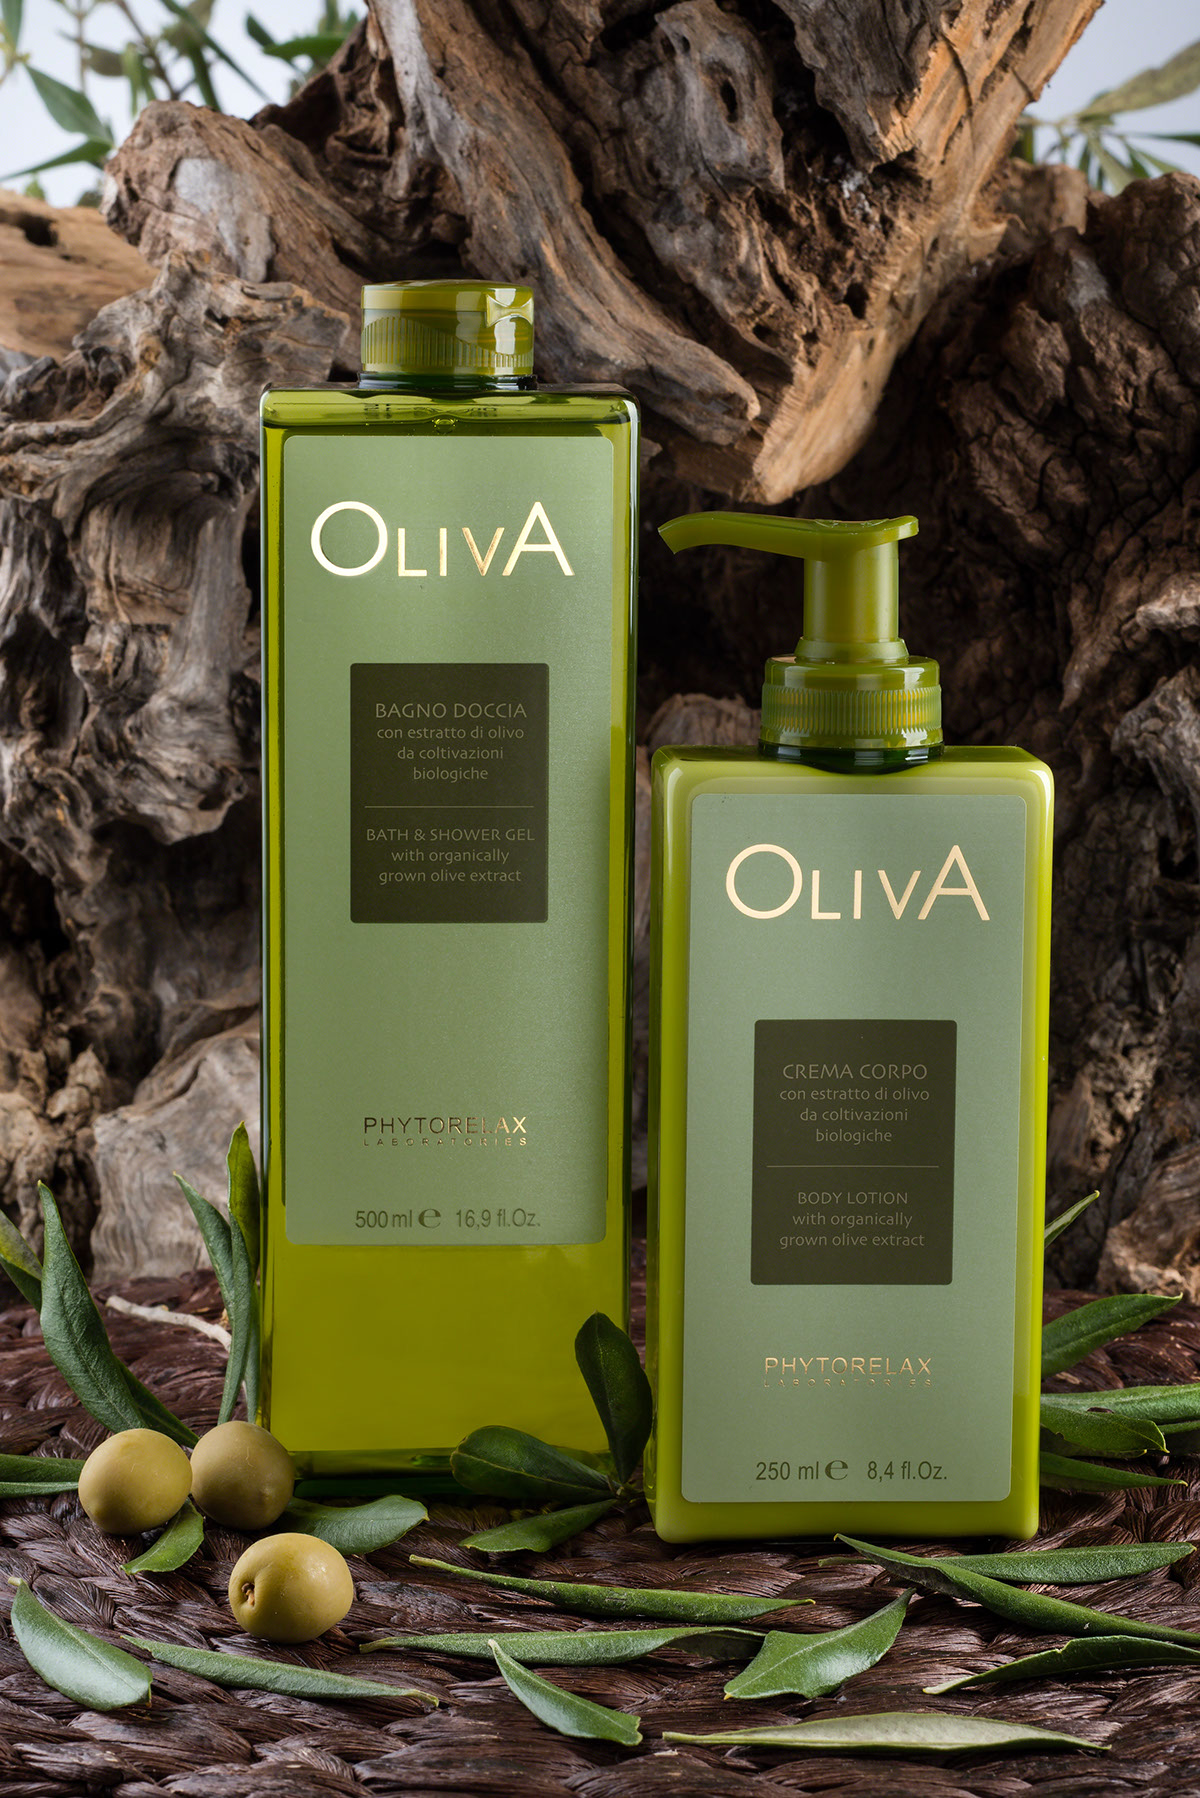 Olive Oil still life olive oil product Fragrance body lotion cream shower gel Cosmetic